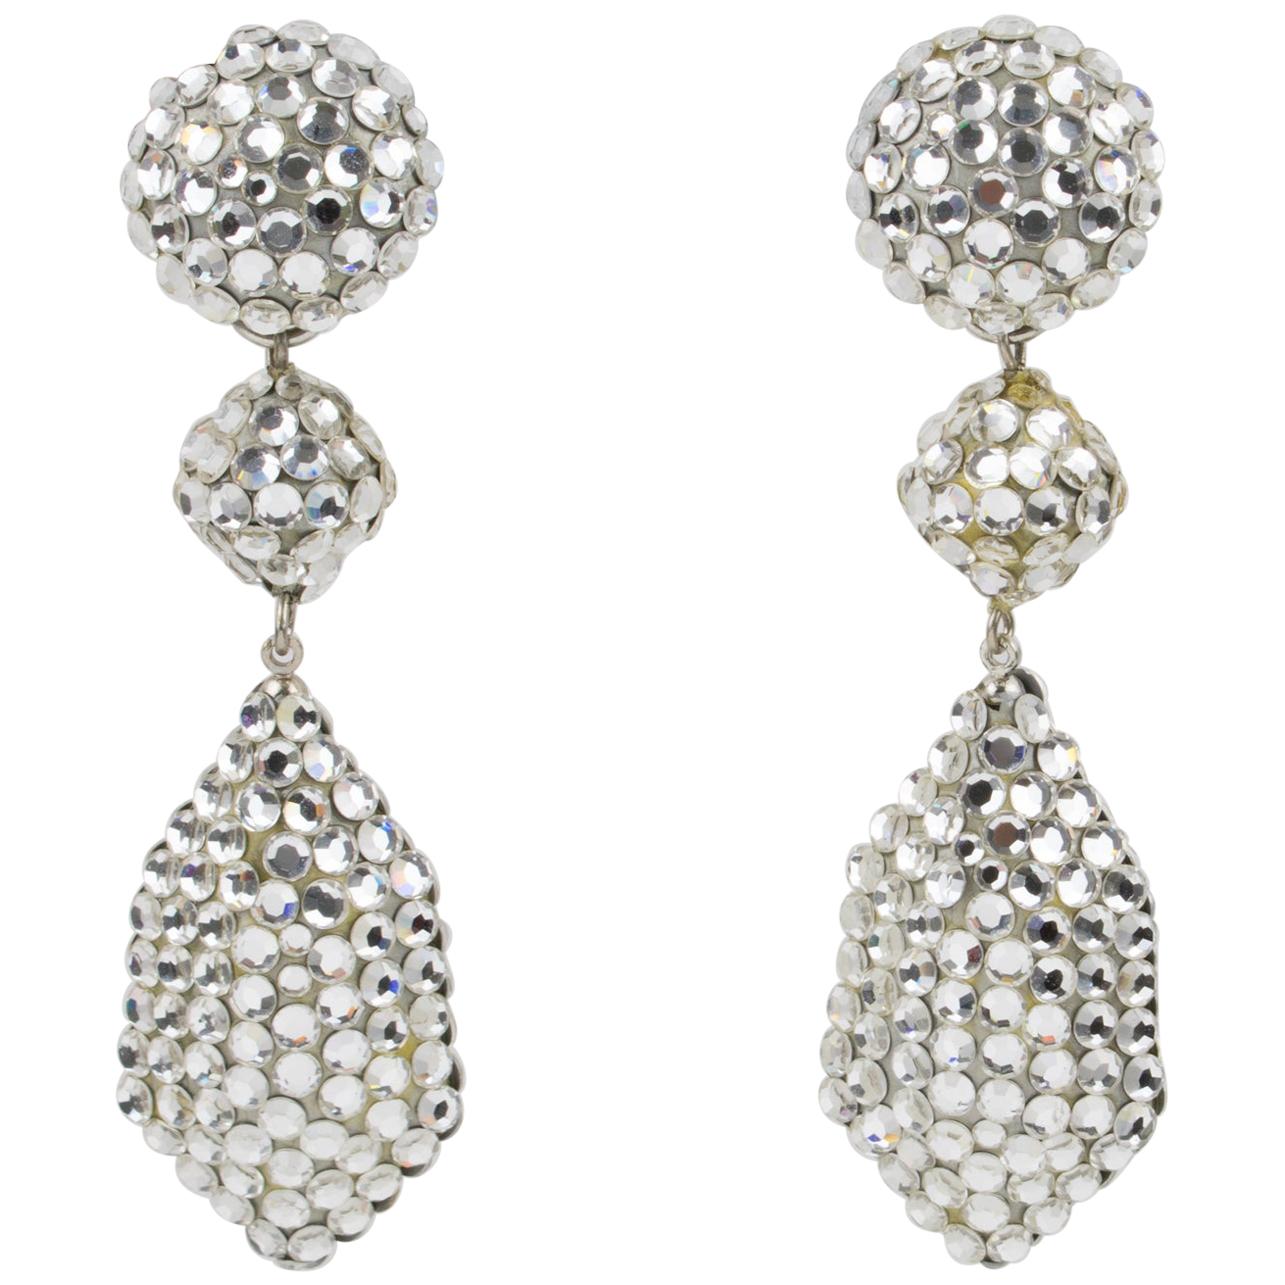 Black and White Crystal Encrusted Statement Earrings By Richard Kerr ...